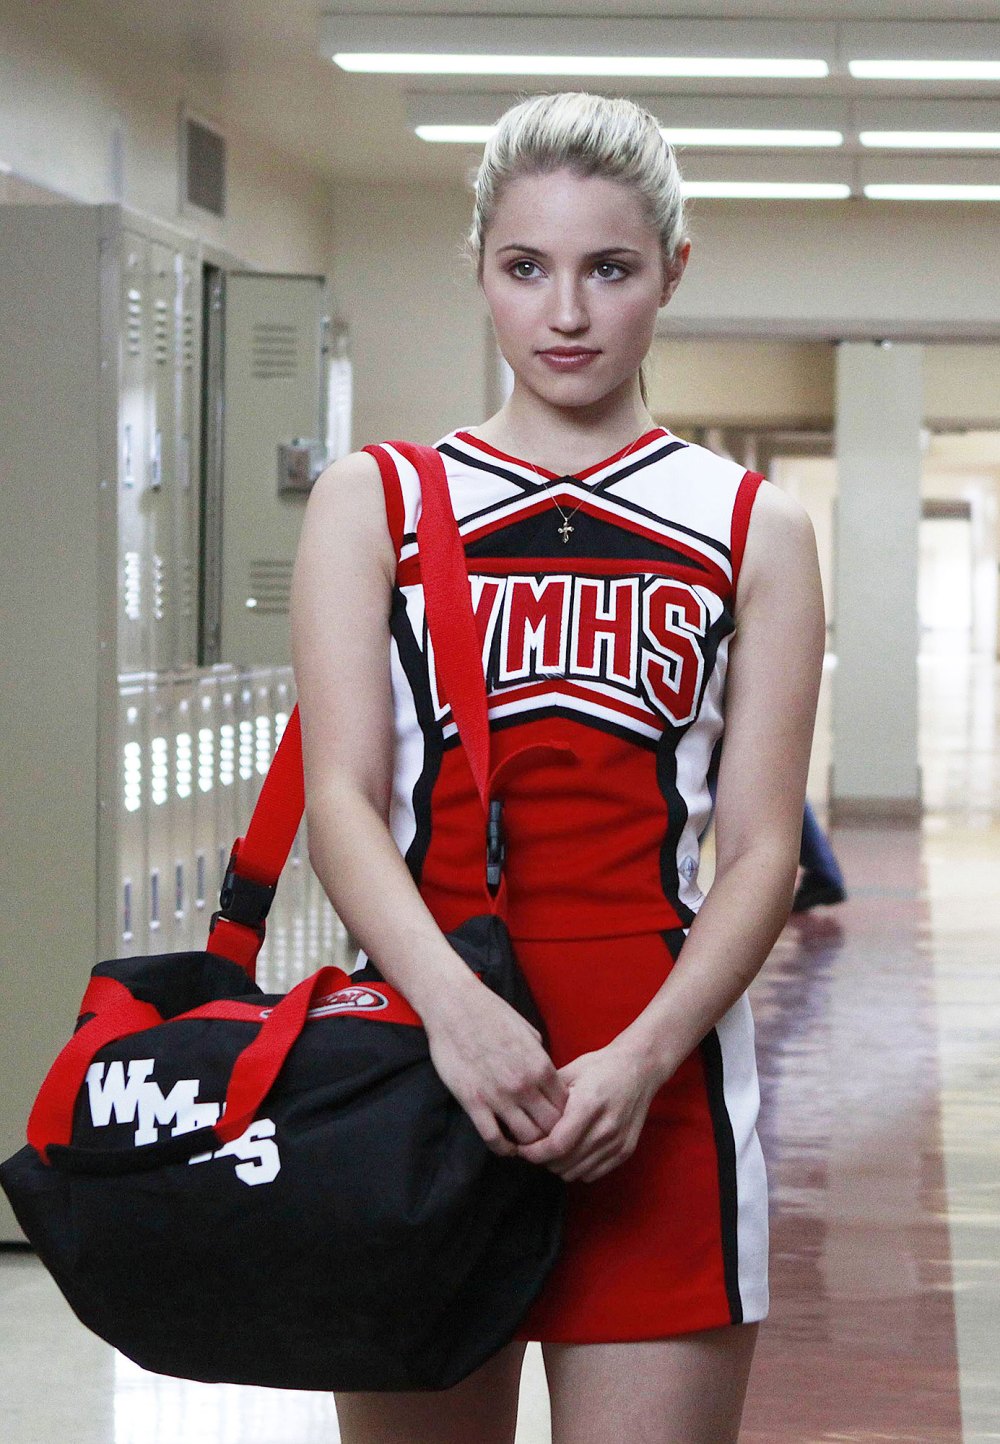 Dianna Agron Is Done With Glee!